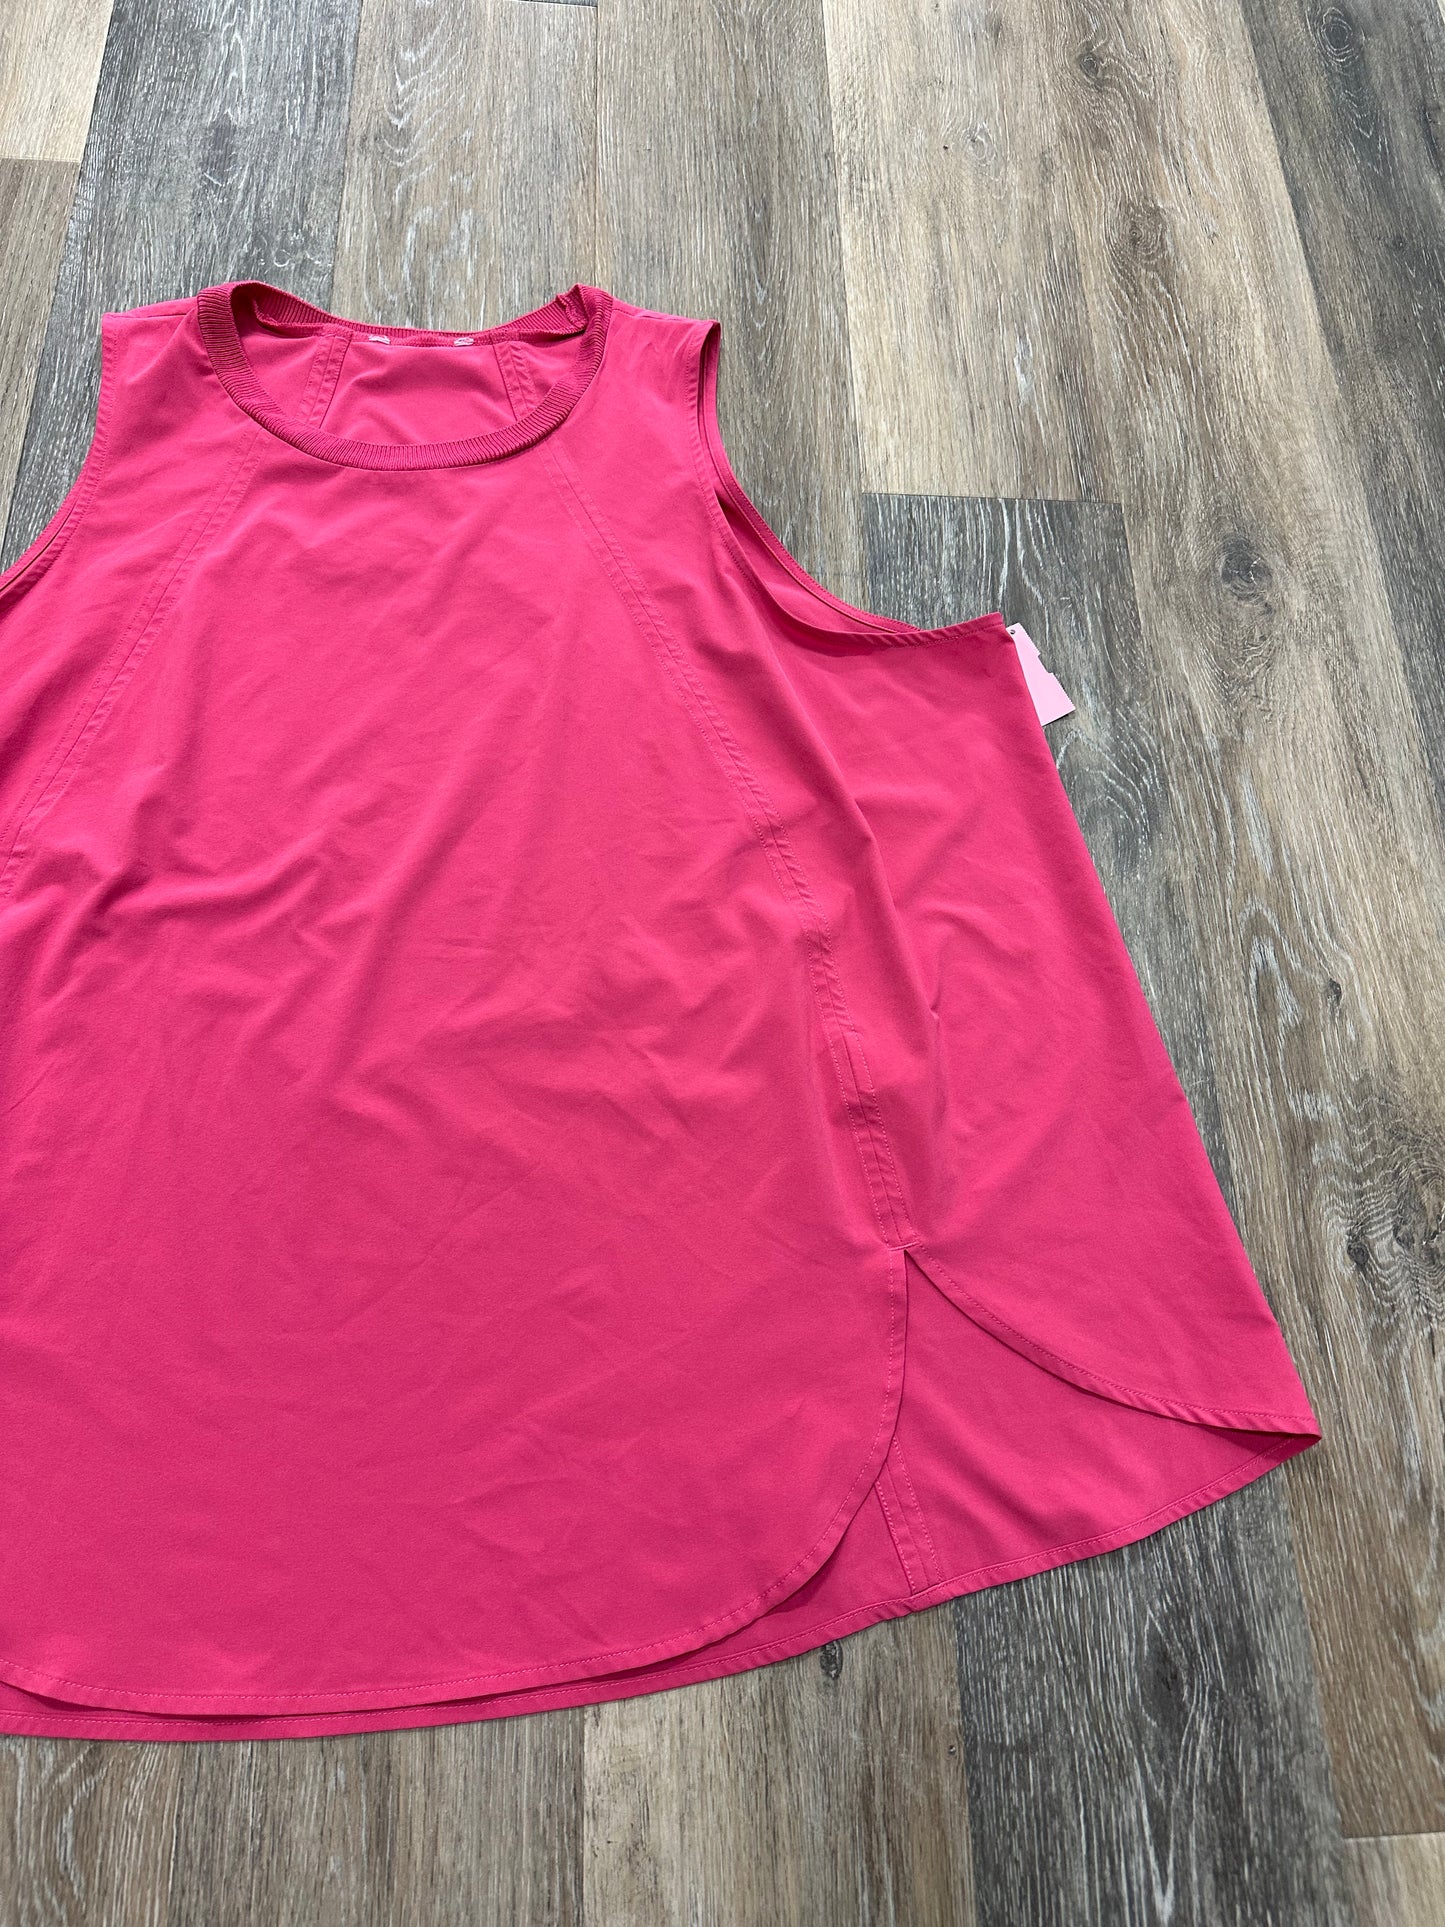 Athletic Tank Top By Athleta  Size: 2x